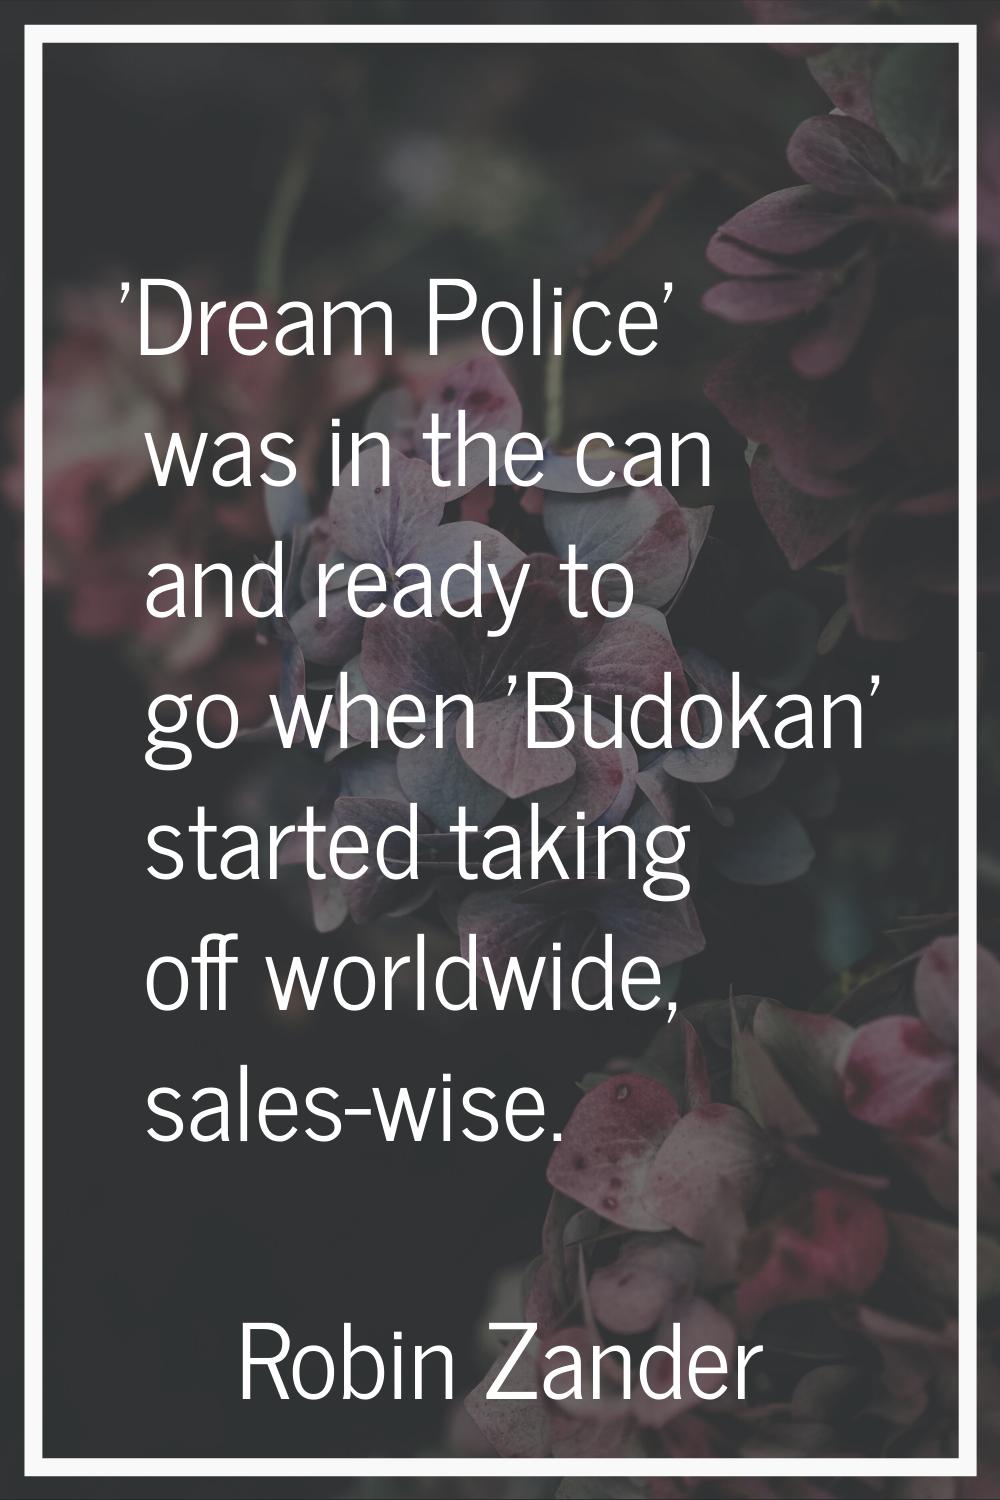 'Dream Police' was in the can and ready to go when 'Budokan' started taking off worldwide, sales-wi